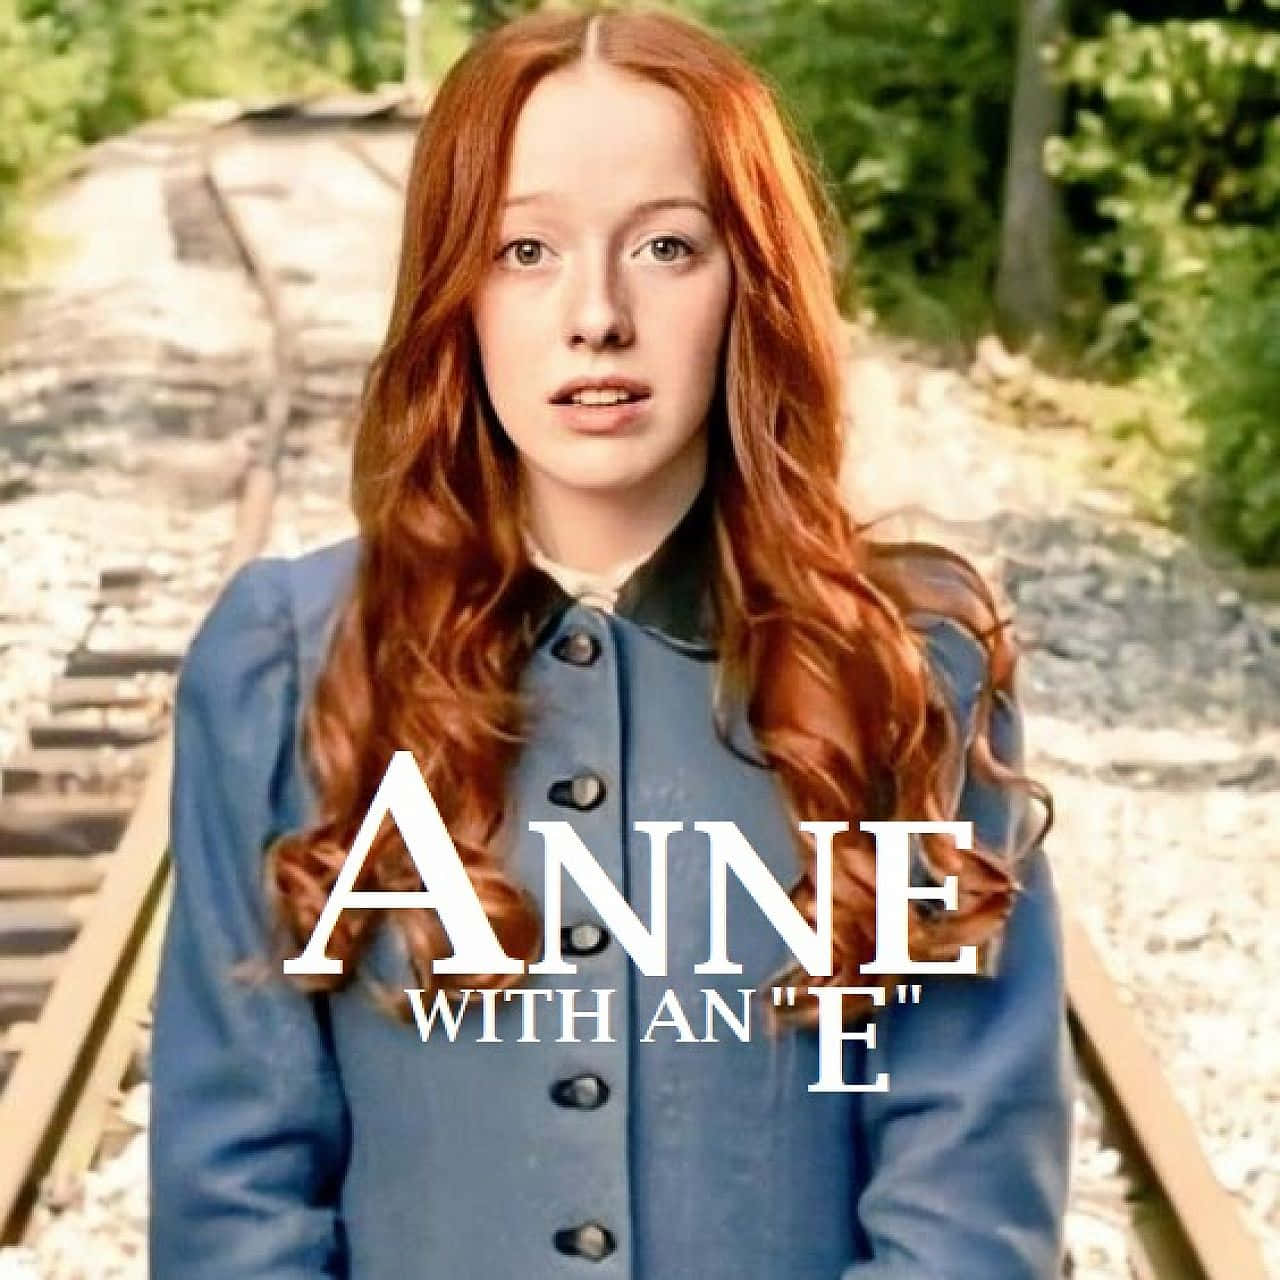 A Young Woman With Red Hair Standing On Train Tracks